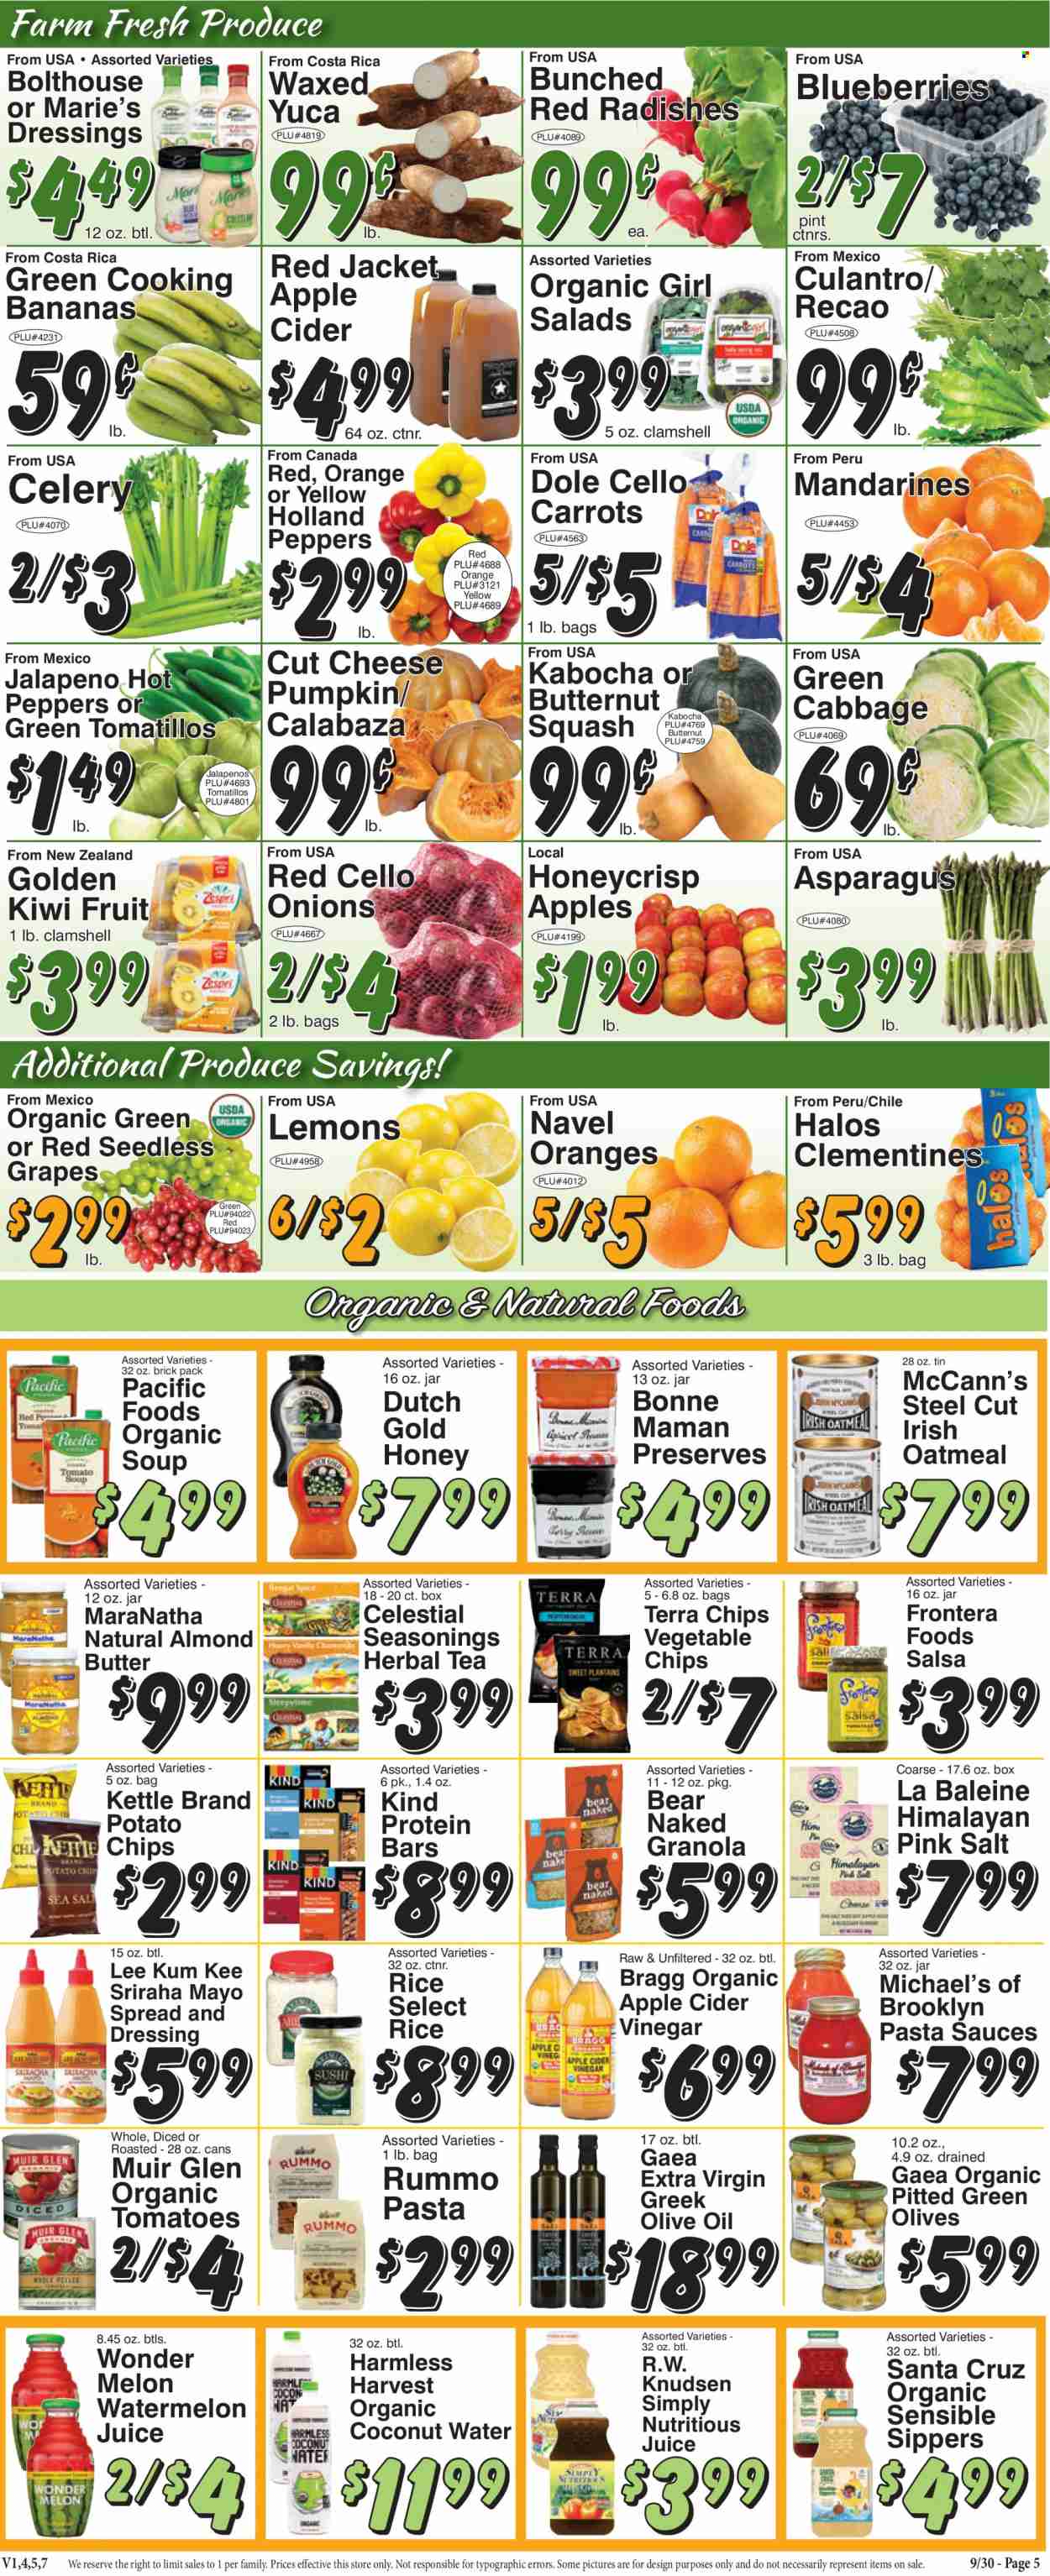 thumbnail - Trade Fair Supermarket Flyer - 09/30/2022 - 10/06/2022 - Sales products - asparagus, cabbage, carrots, celery, radishes, tomatillo, pumpkin, Dole, peppers, jalapeño, bananas, blueberries, grapes, kiwi, mandarines, seedless grapes, watermelon, oranges, pasta sauce, soup, pasta, almond butter, mayonnaise, potato chips, chips, vegetable chips, oatmeal, olives, granola, protein bar, rice, dressing, salsa, Lee Kum Kee, apple cider vinegar, extra virgin olive oil, olive oil, oil, juice, coconut water, tea, herbal tea, beer, butternut squash, clementines, melons, lemons, navel oranges. Page 5.